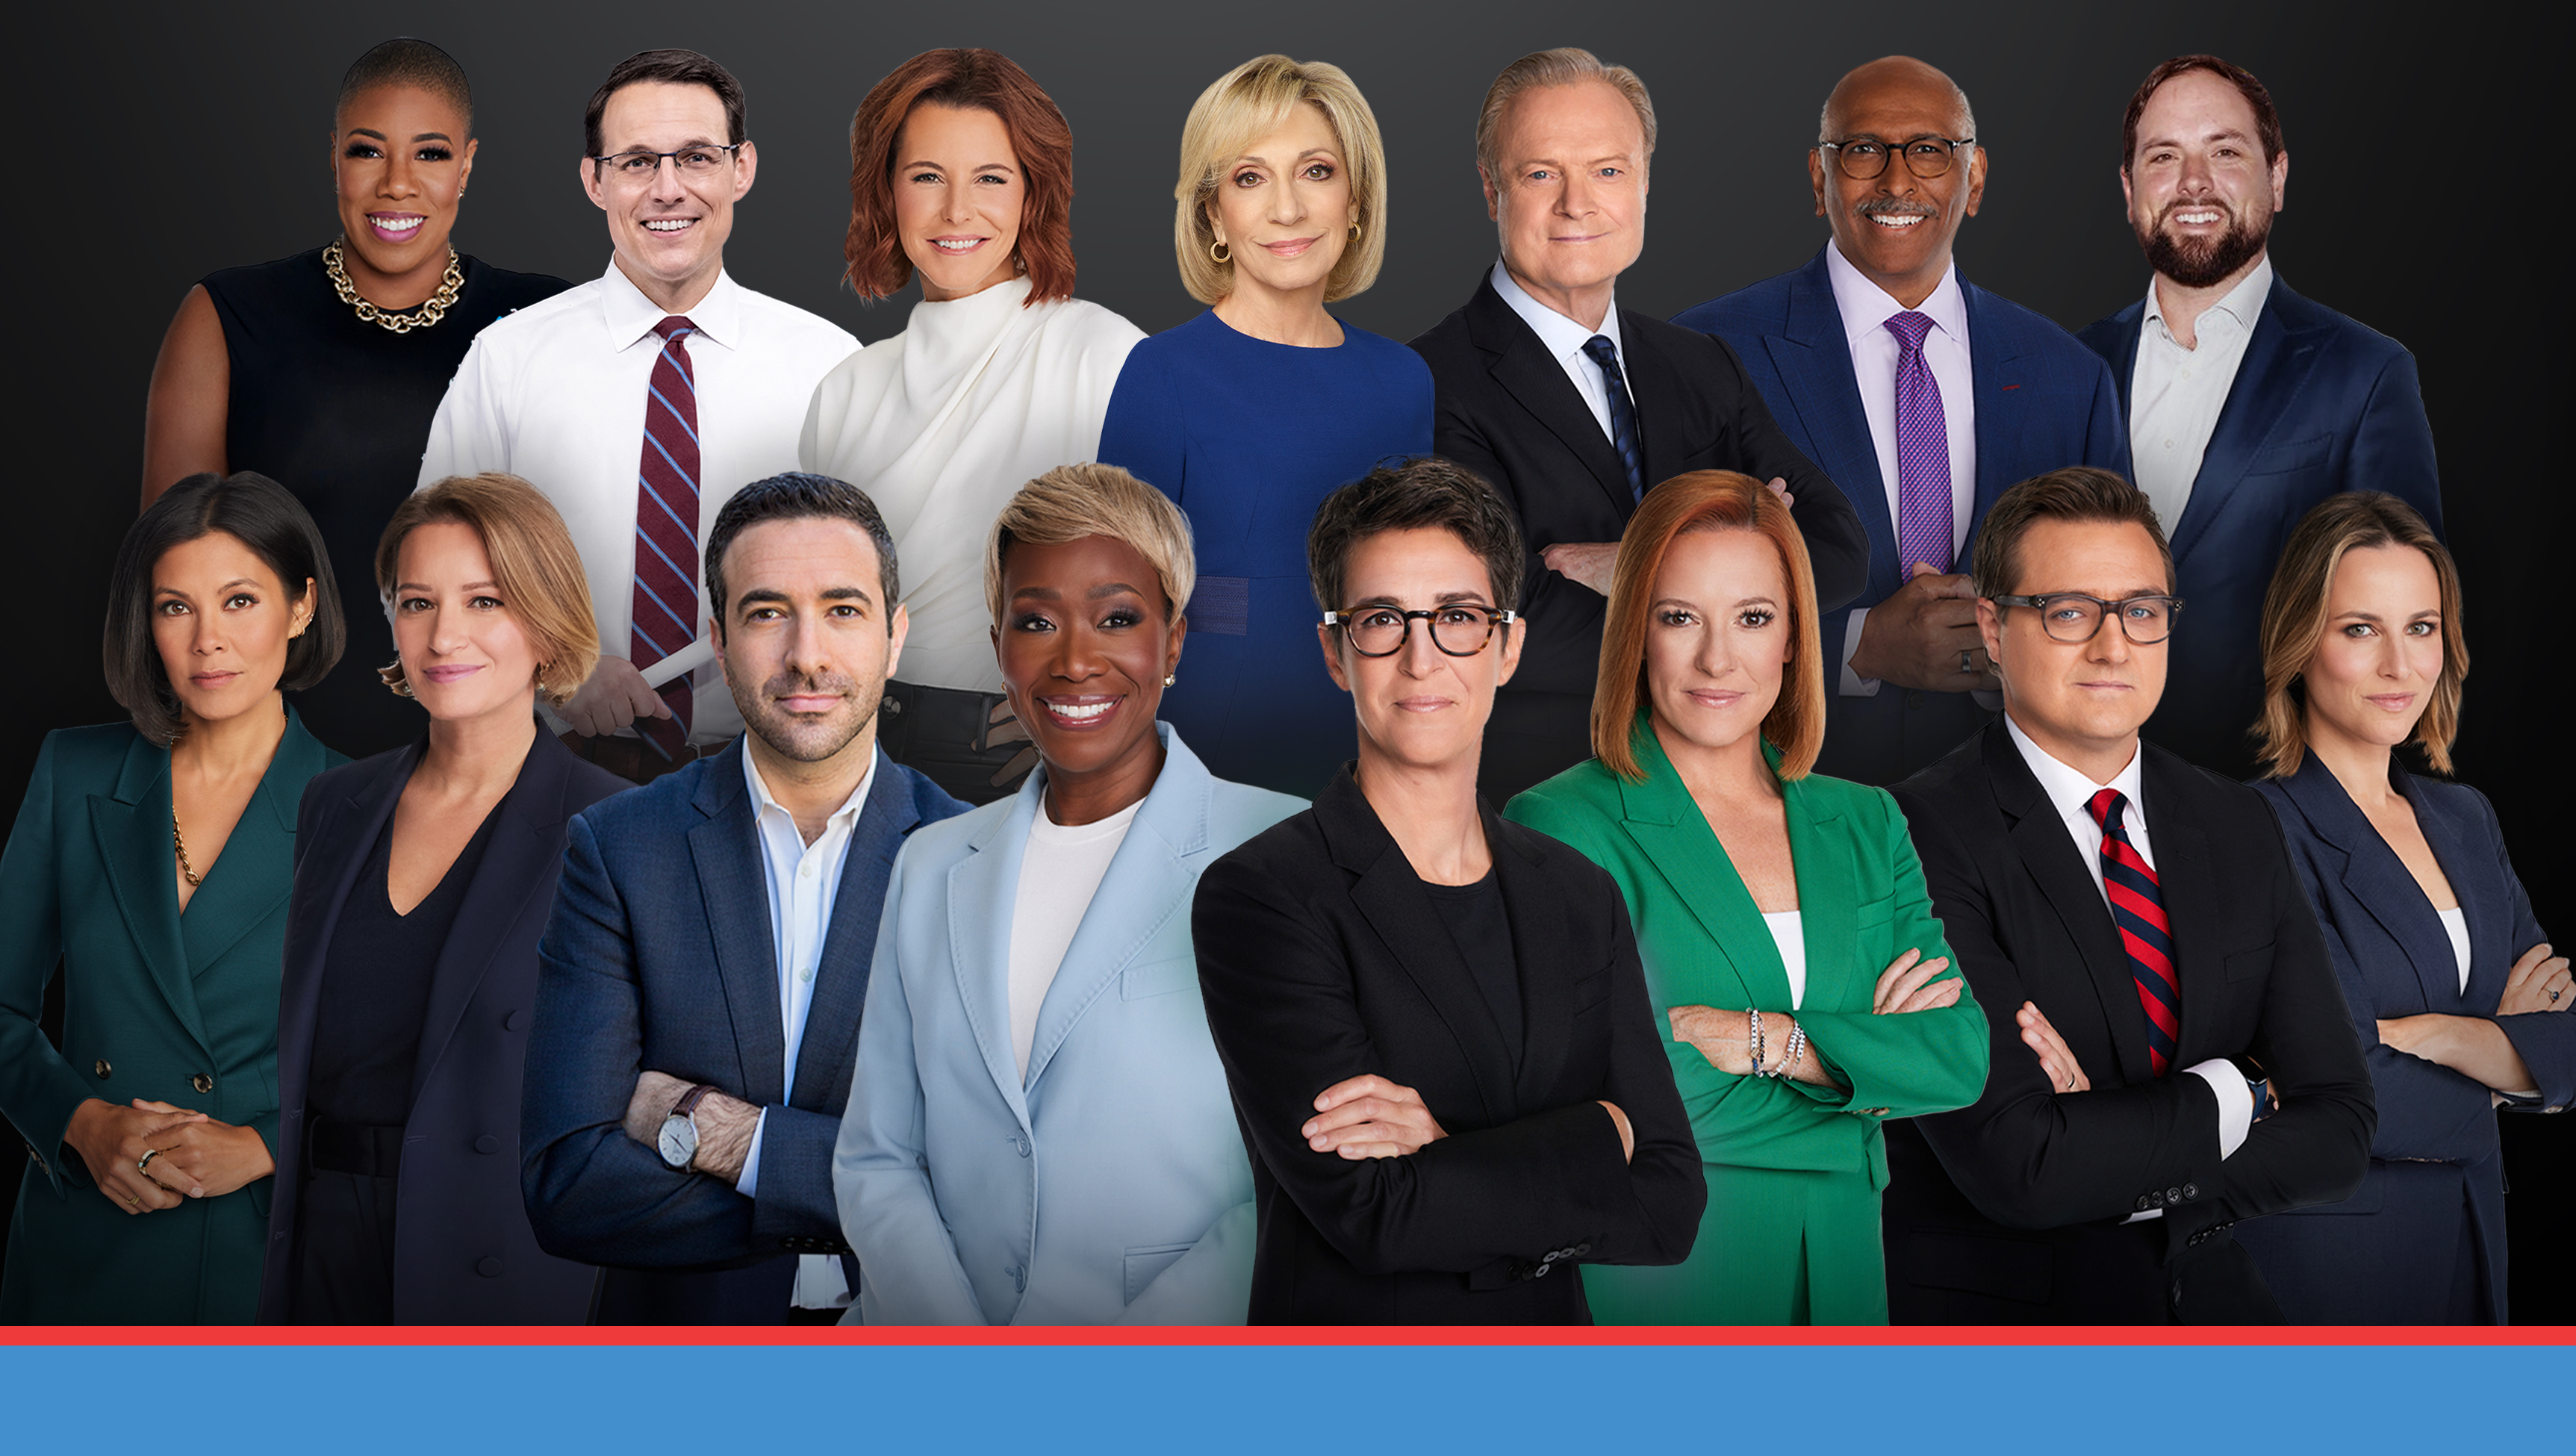 MSNBC Plans Its Own ‘BravoCon’ With ‘MSNBC Live’ Event in September